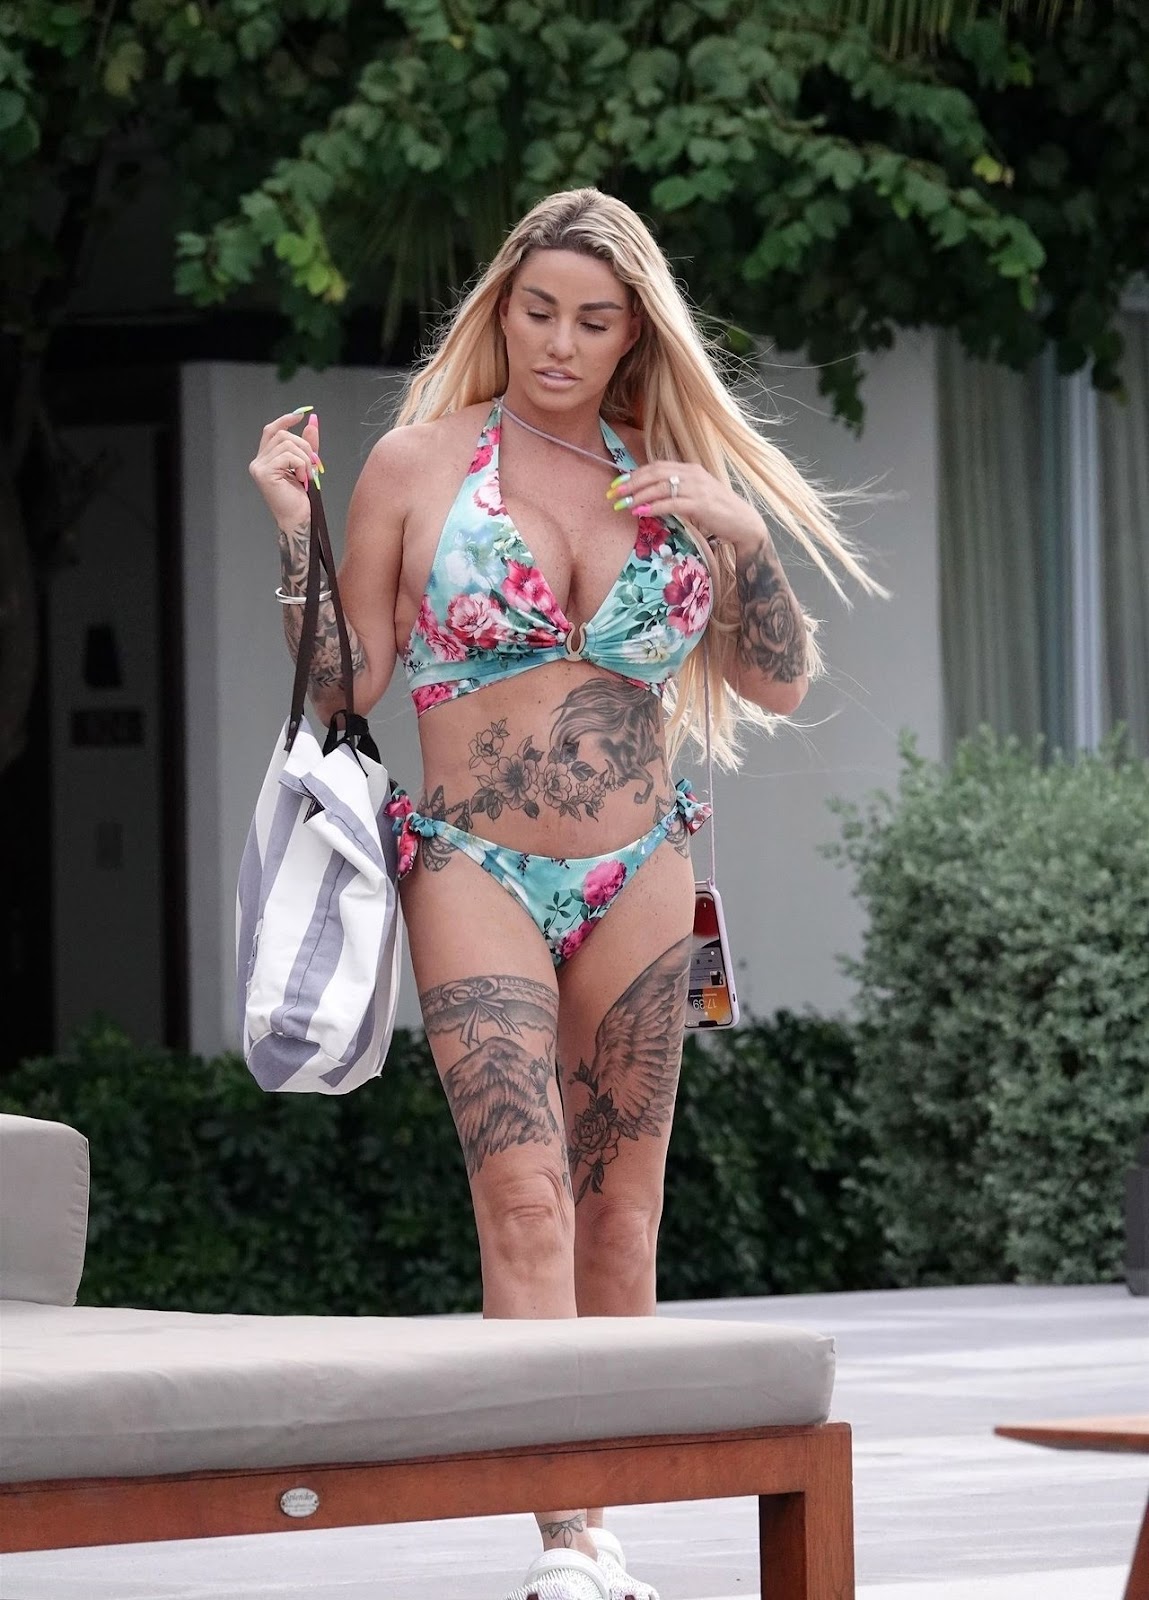 Katie Price shows off tattooed body as she visits cosmetic surgeon ‘for 16th boob job’ on holiday in Thailand